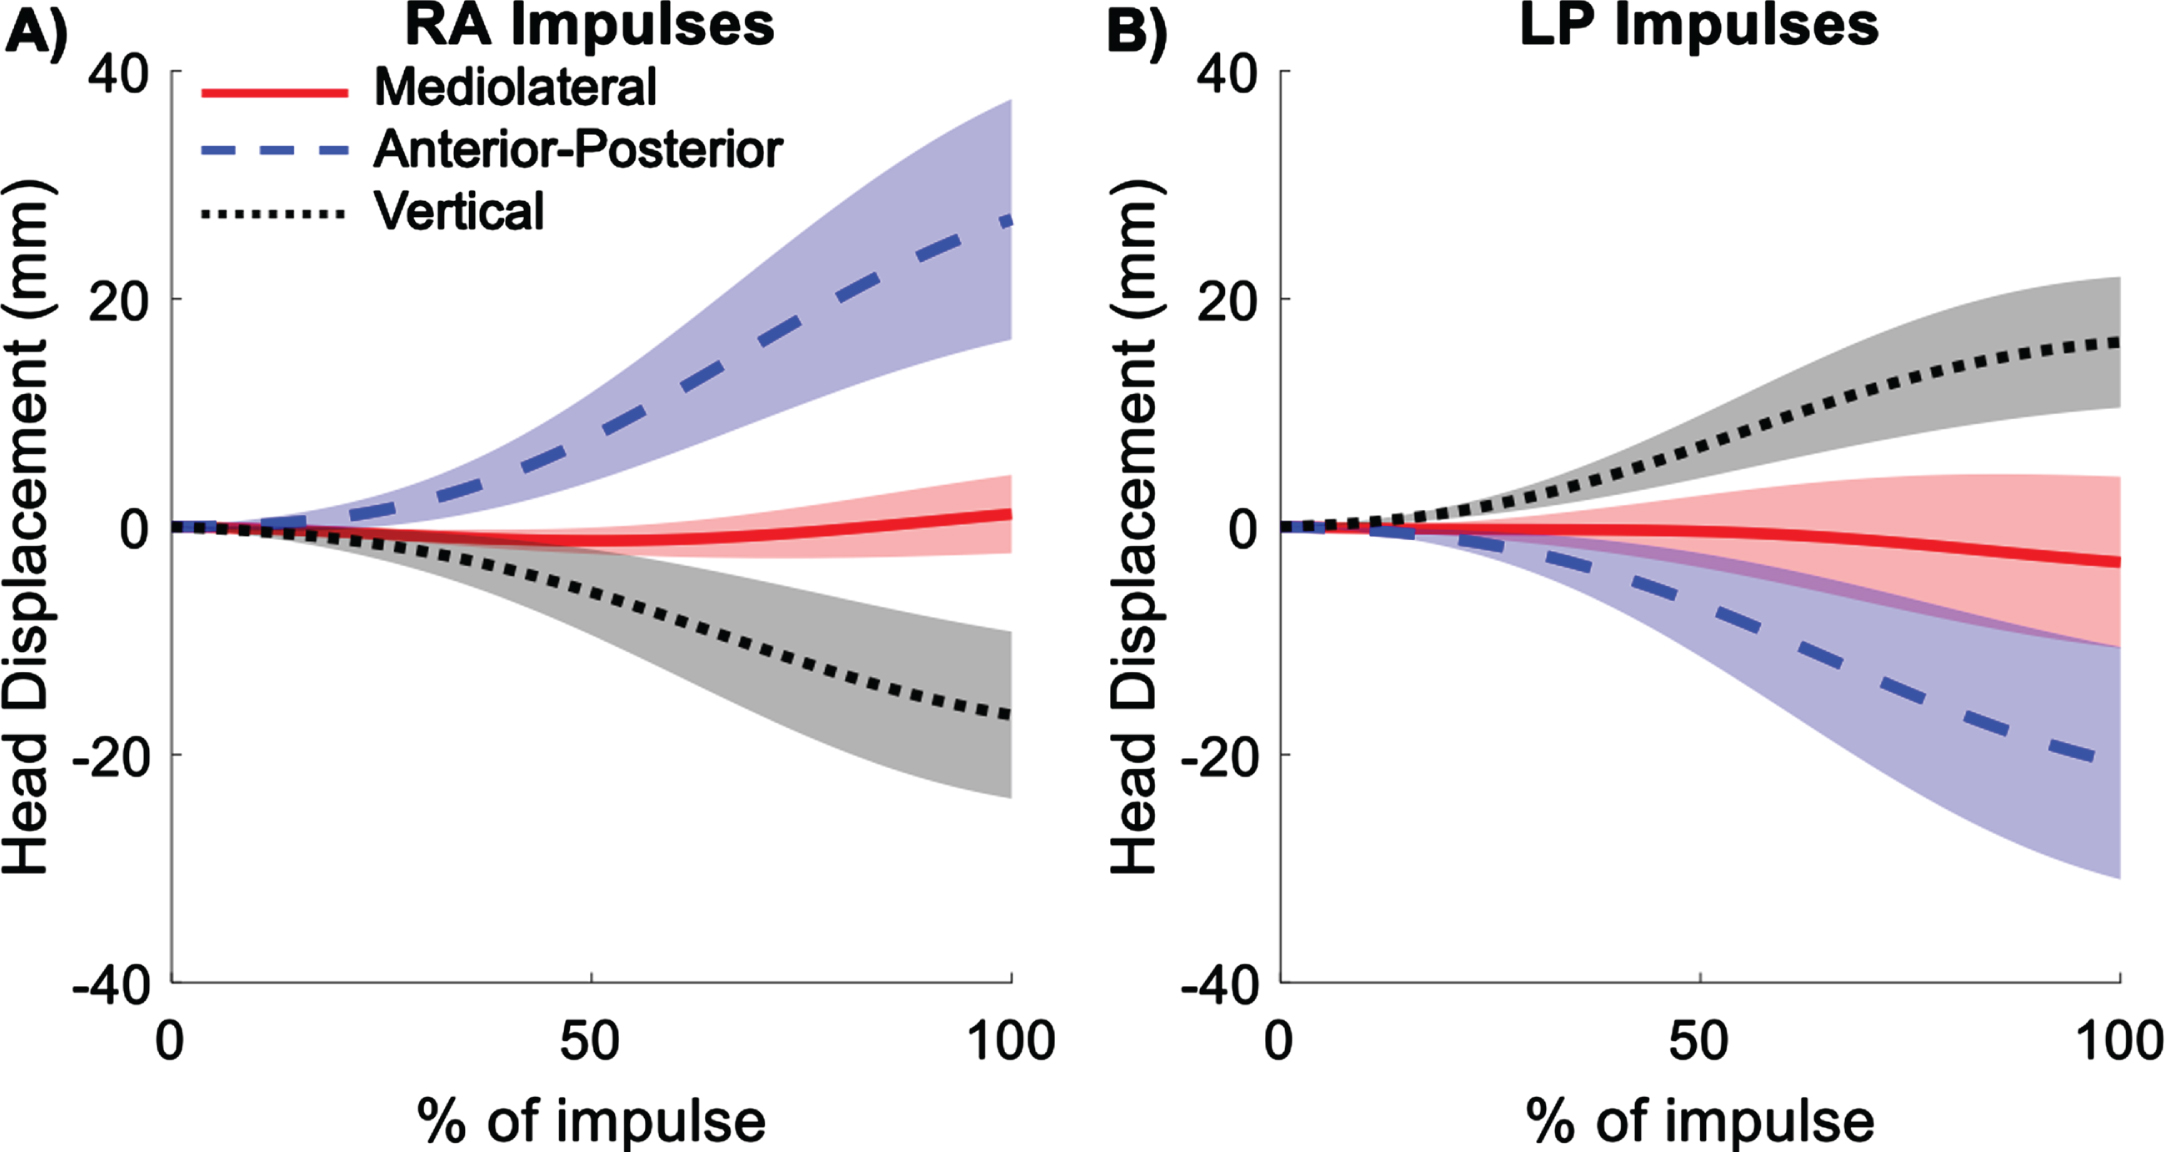 Average displacement of the origin of the head coordinate system (midpoint between right and left ears) during right anterior (RA) (A) and left posterior (LP) (B) impulses. Shading represents ± 1 standard deviation of inter-subject variability.